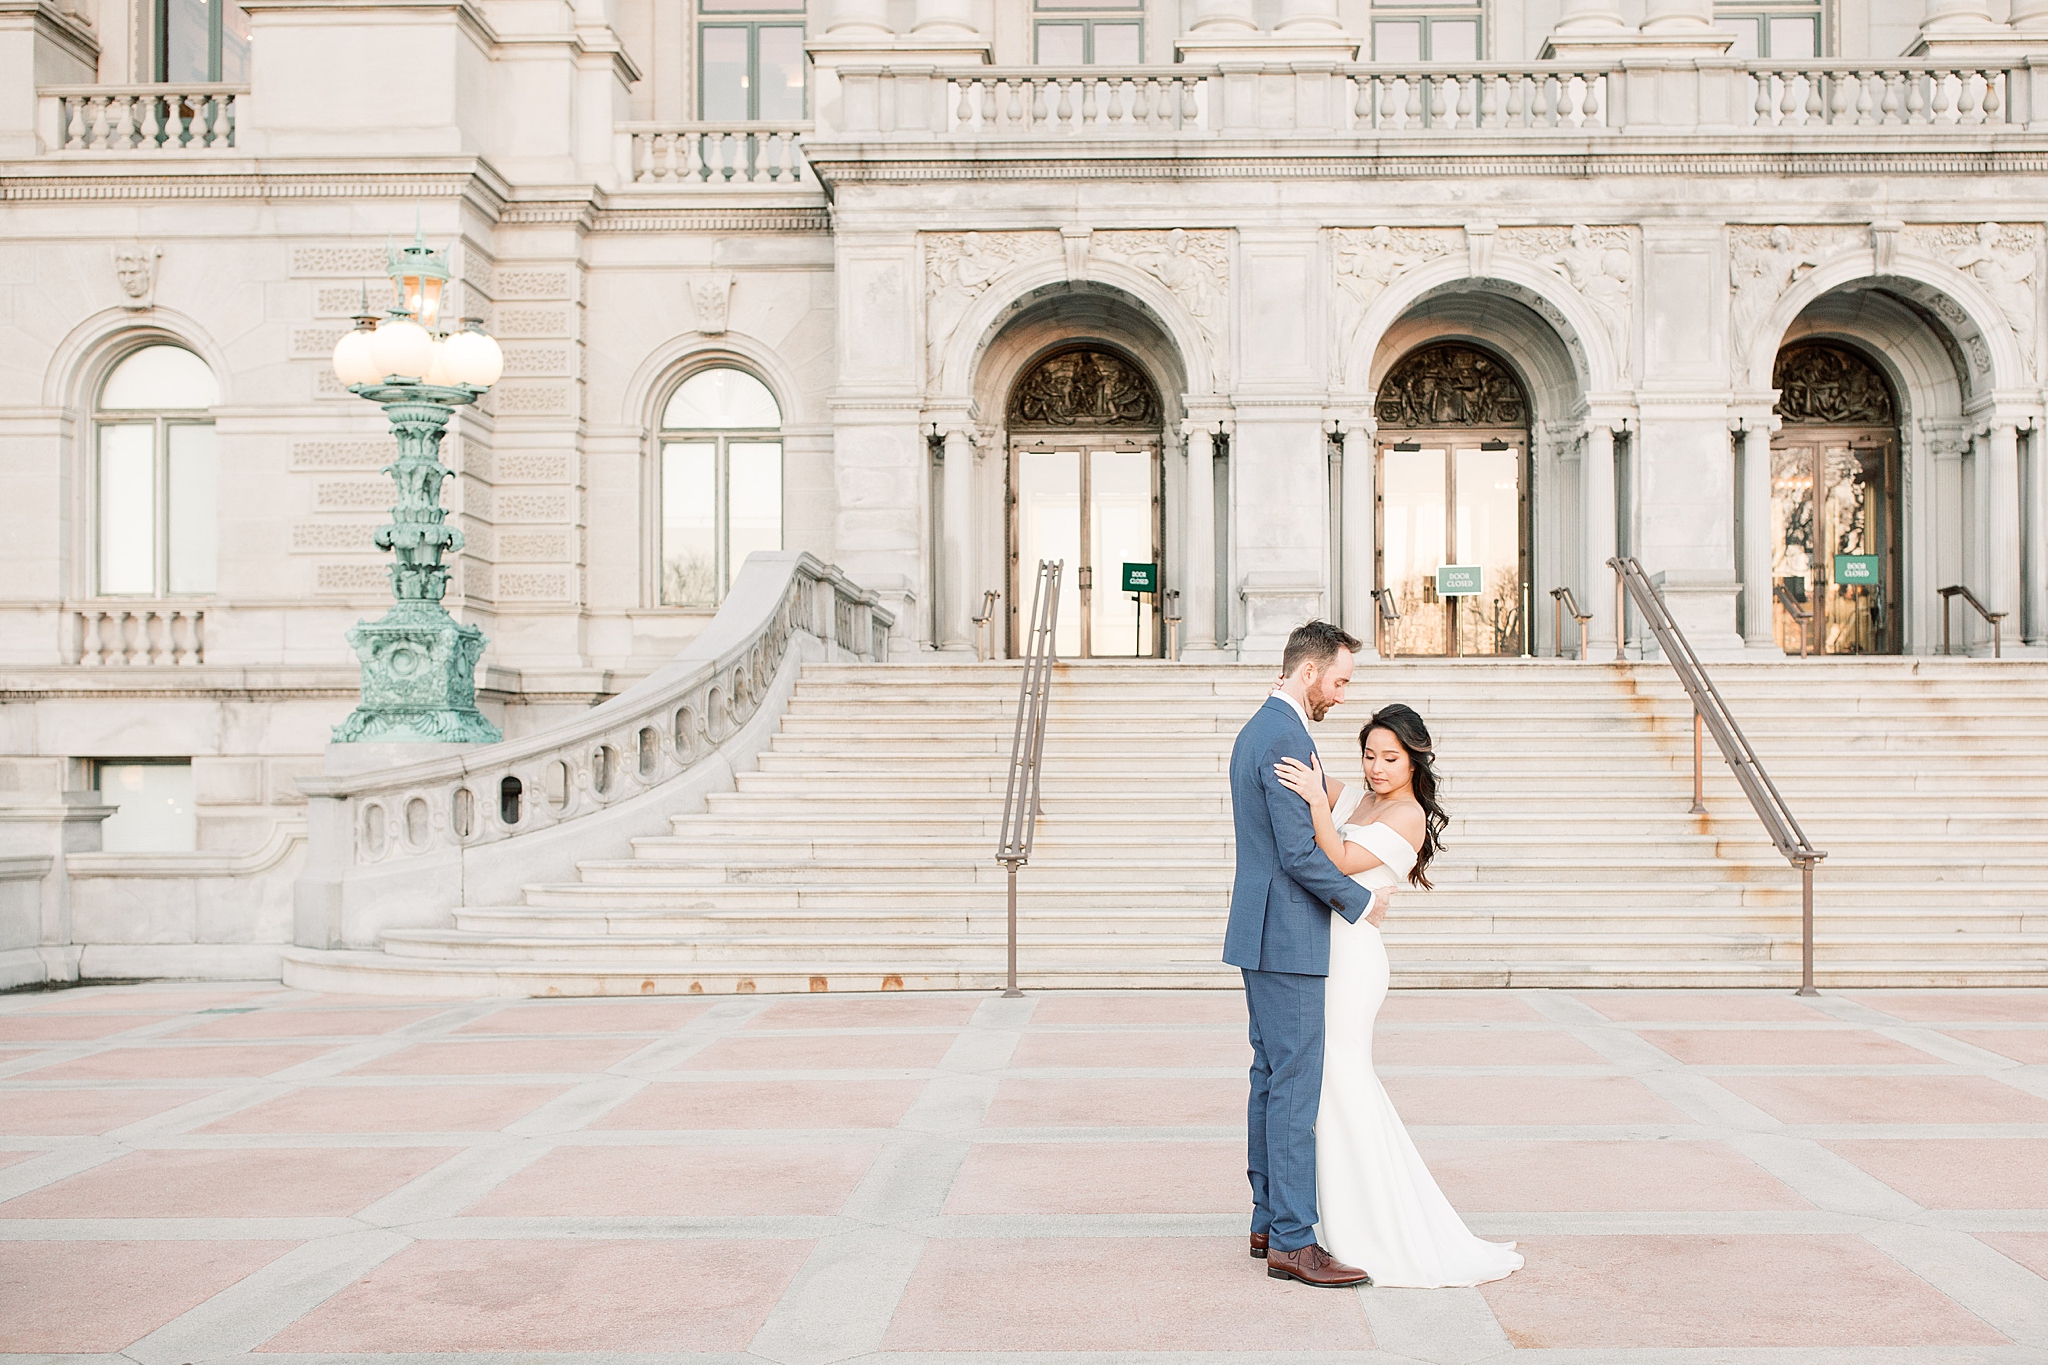 A romantic wedding elopement in Washington, DC; photographed by fine art film photographer, Alicia Lacey. 